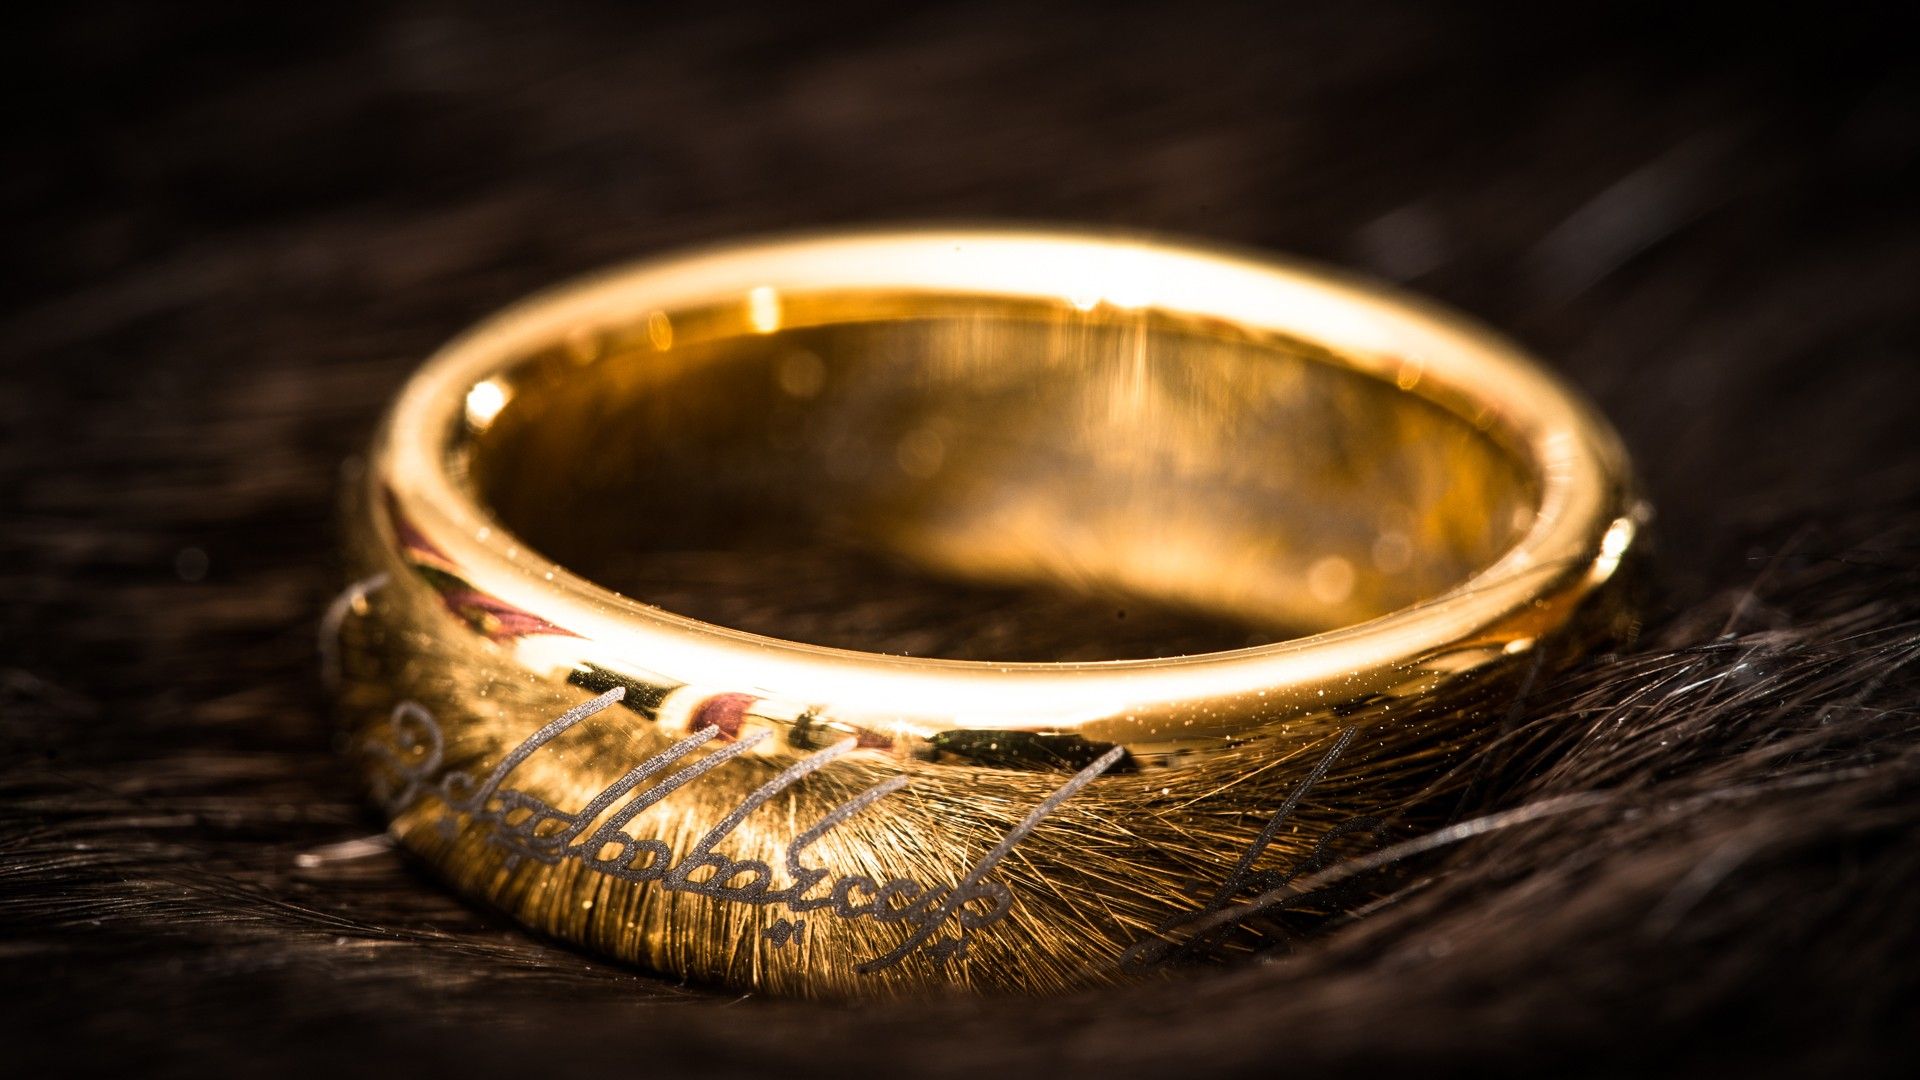 rings the lord of the rings one ring HD wallpaper jpg 556 - Lord Of The Rings HD Wallpaper